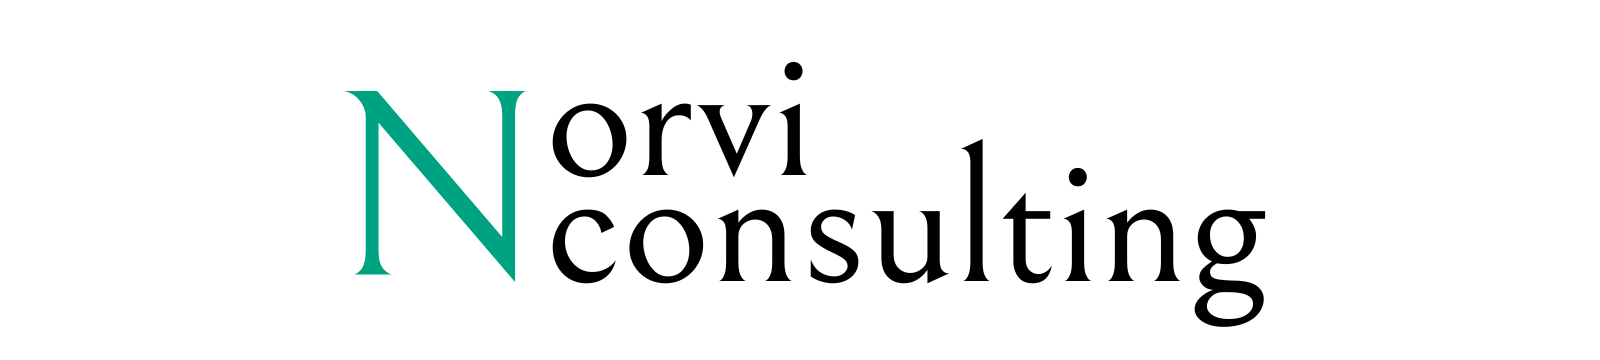 NorviConsulting